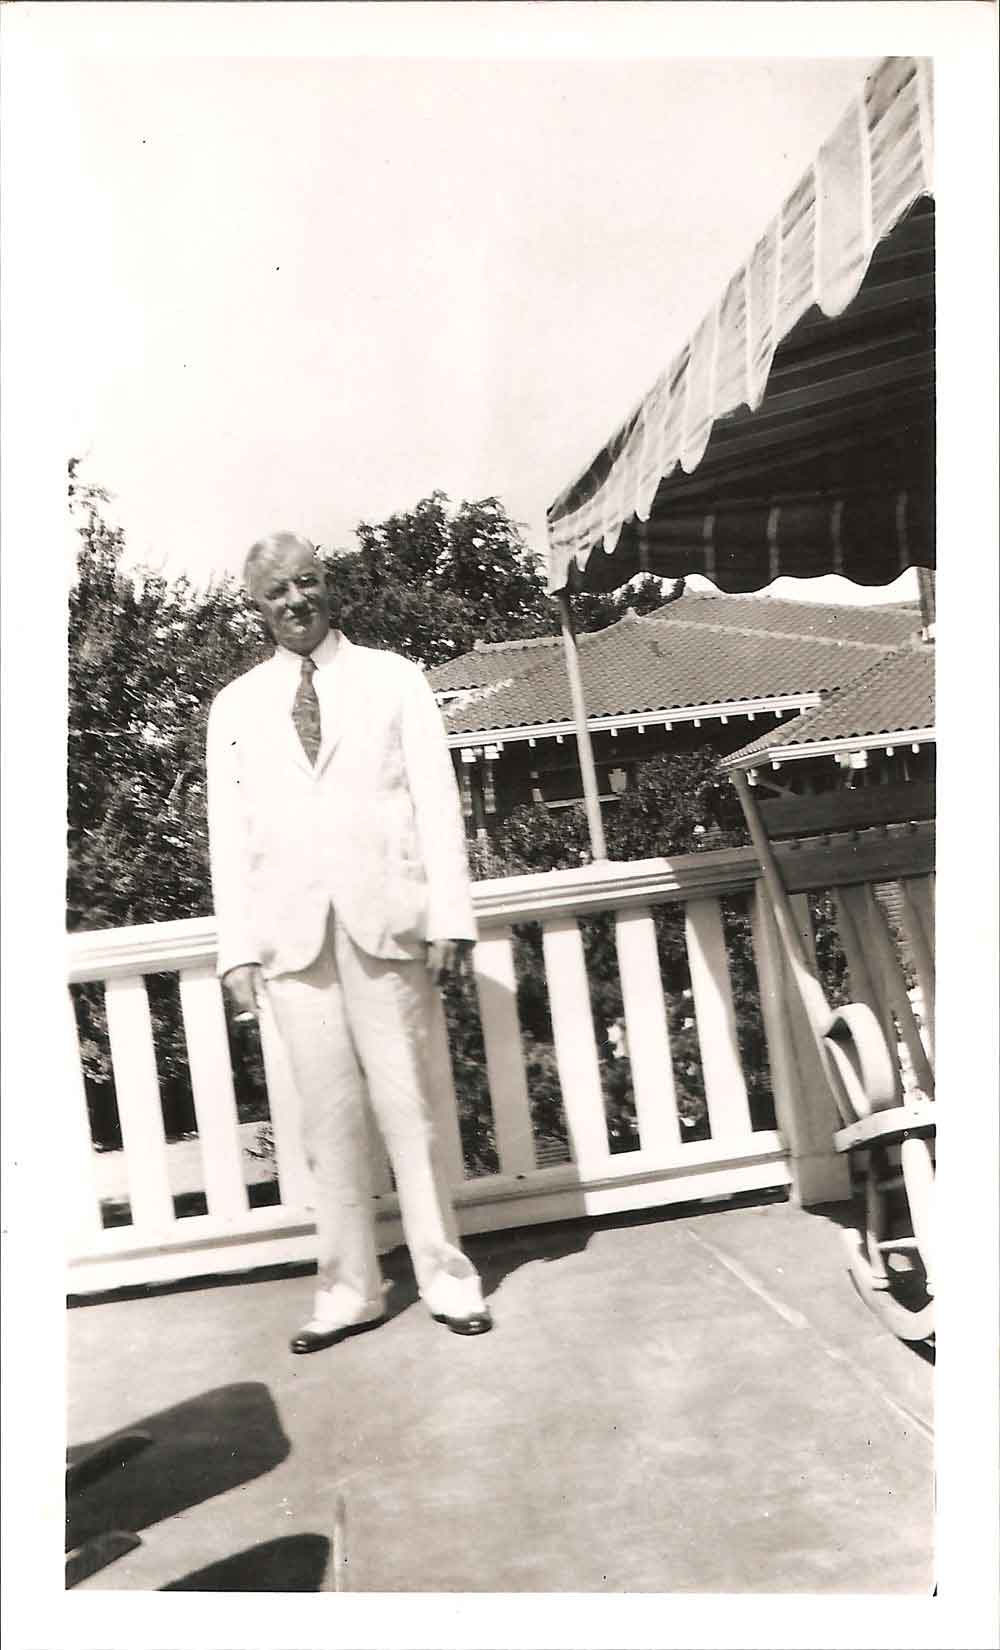 (HTC.2010.8.25) - Frank P. Johnson on Balcony of 810 NW 15, c. early 1930s